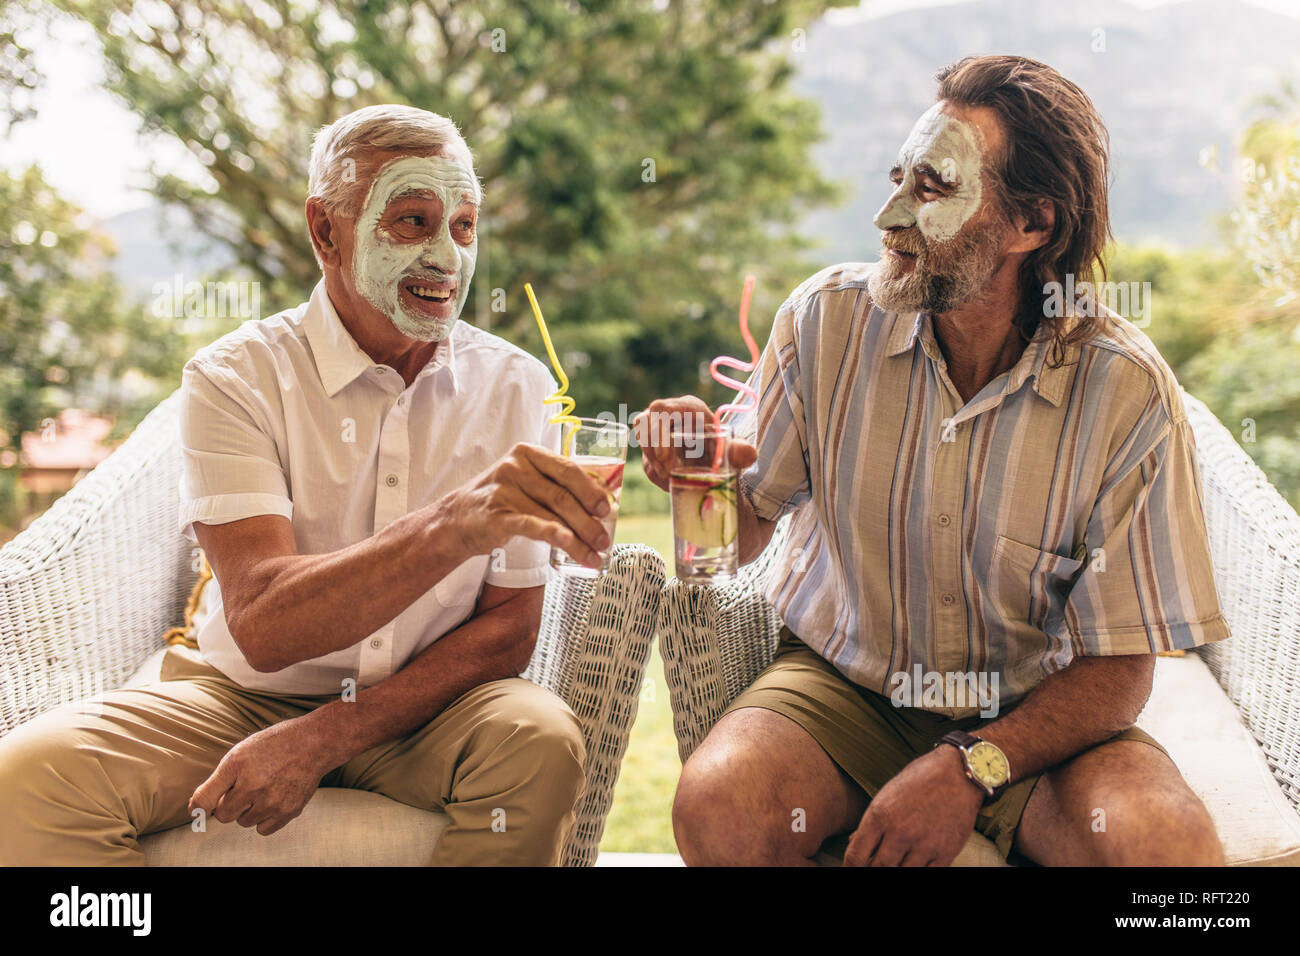 Two elderly friends with facial clay mask on clinking juice glasses. Senior men sitting on chair with spa face mask having juice. Stock Photo